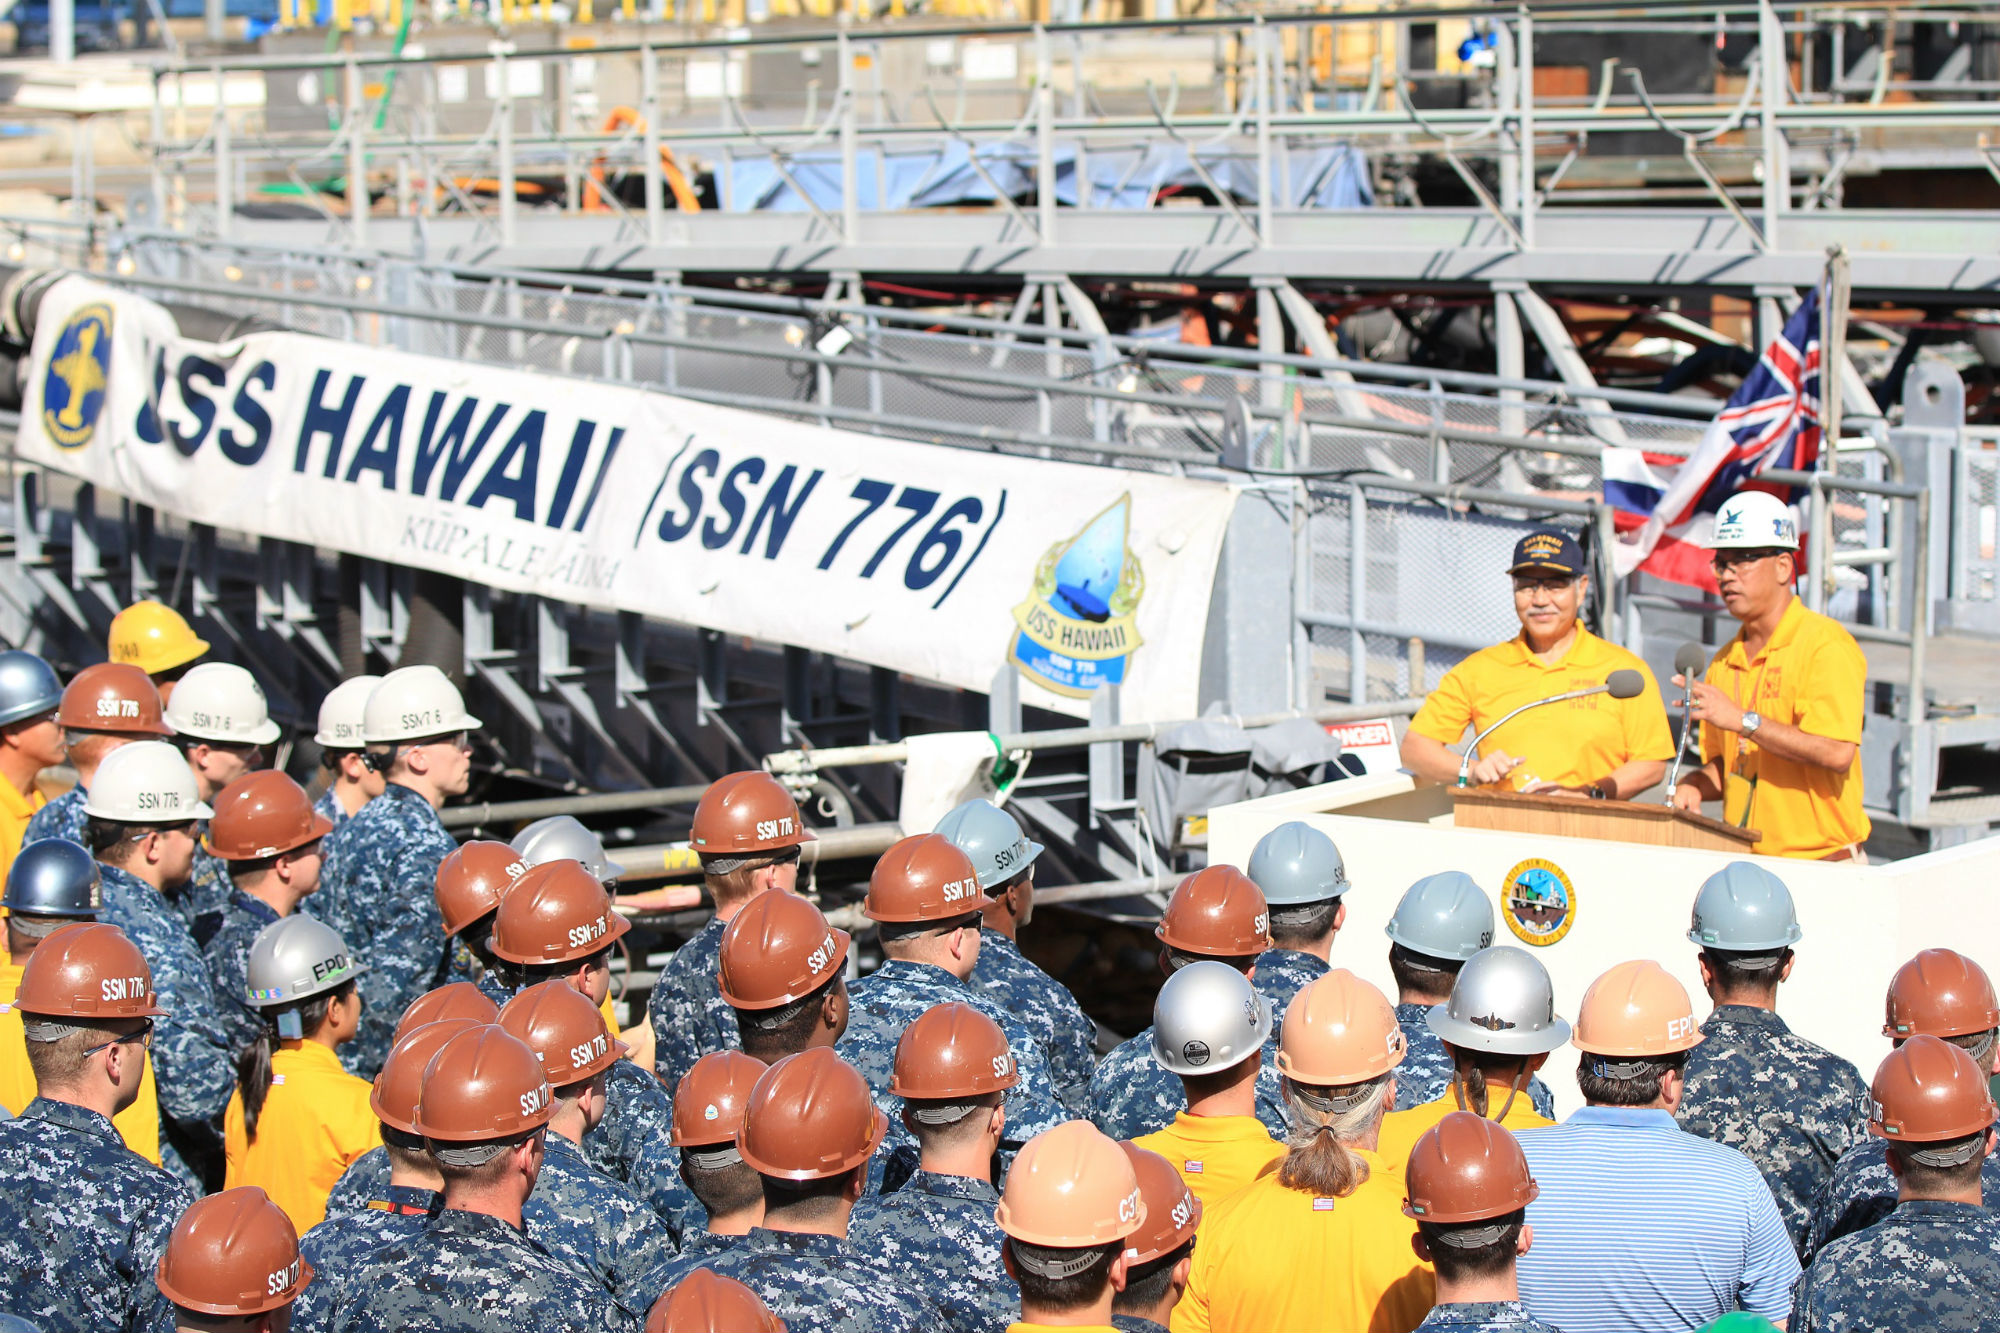 Governor Ige addresses submarine crew and shipyard personnel